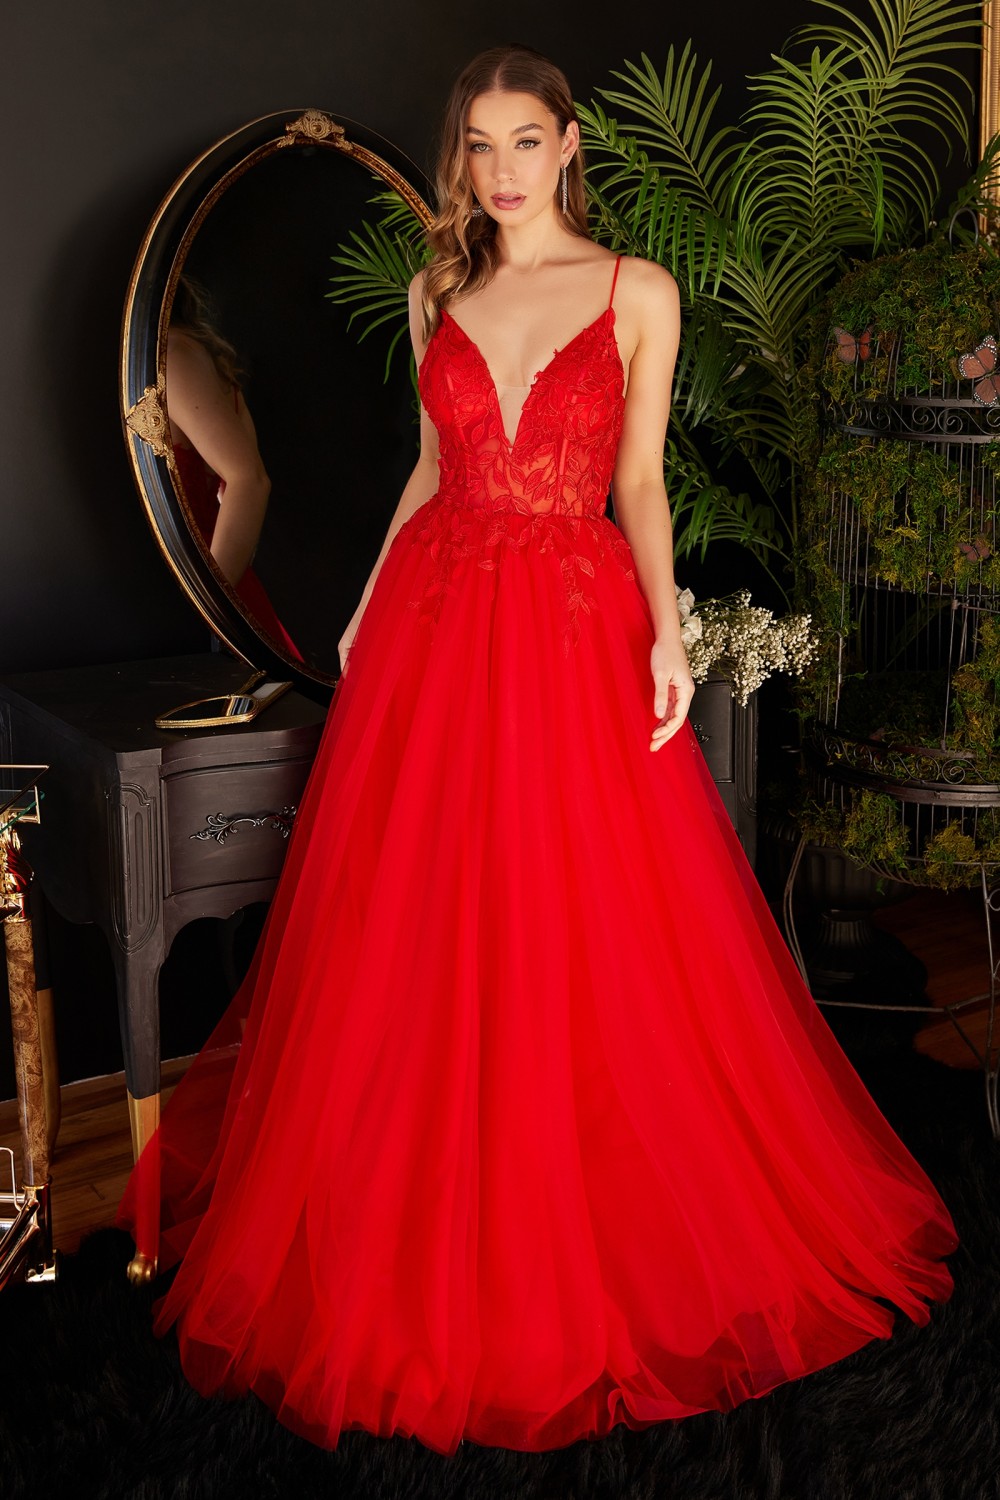 Floral lace plunging neckline gown